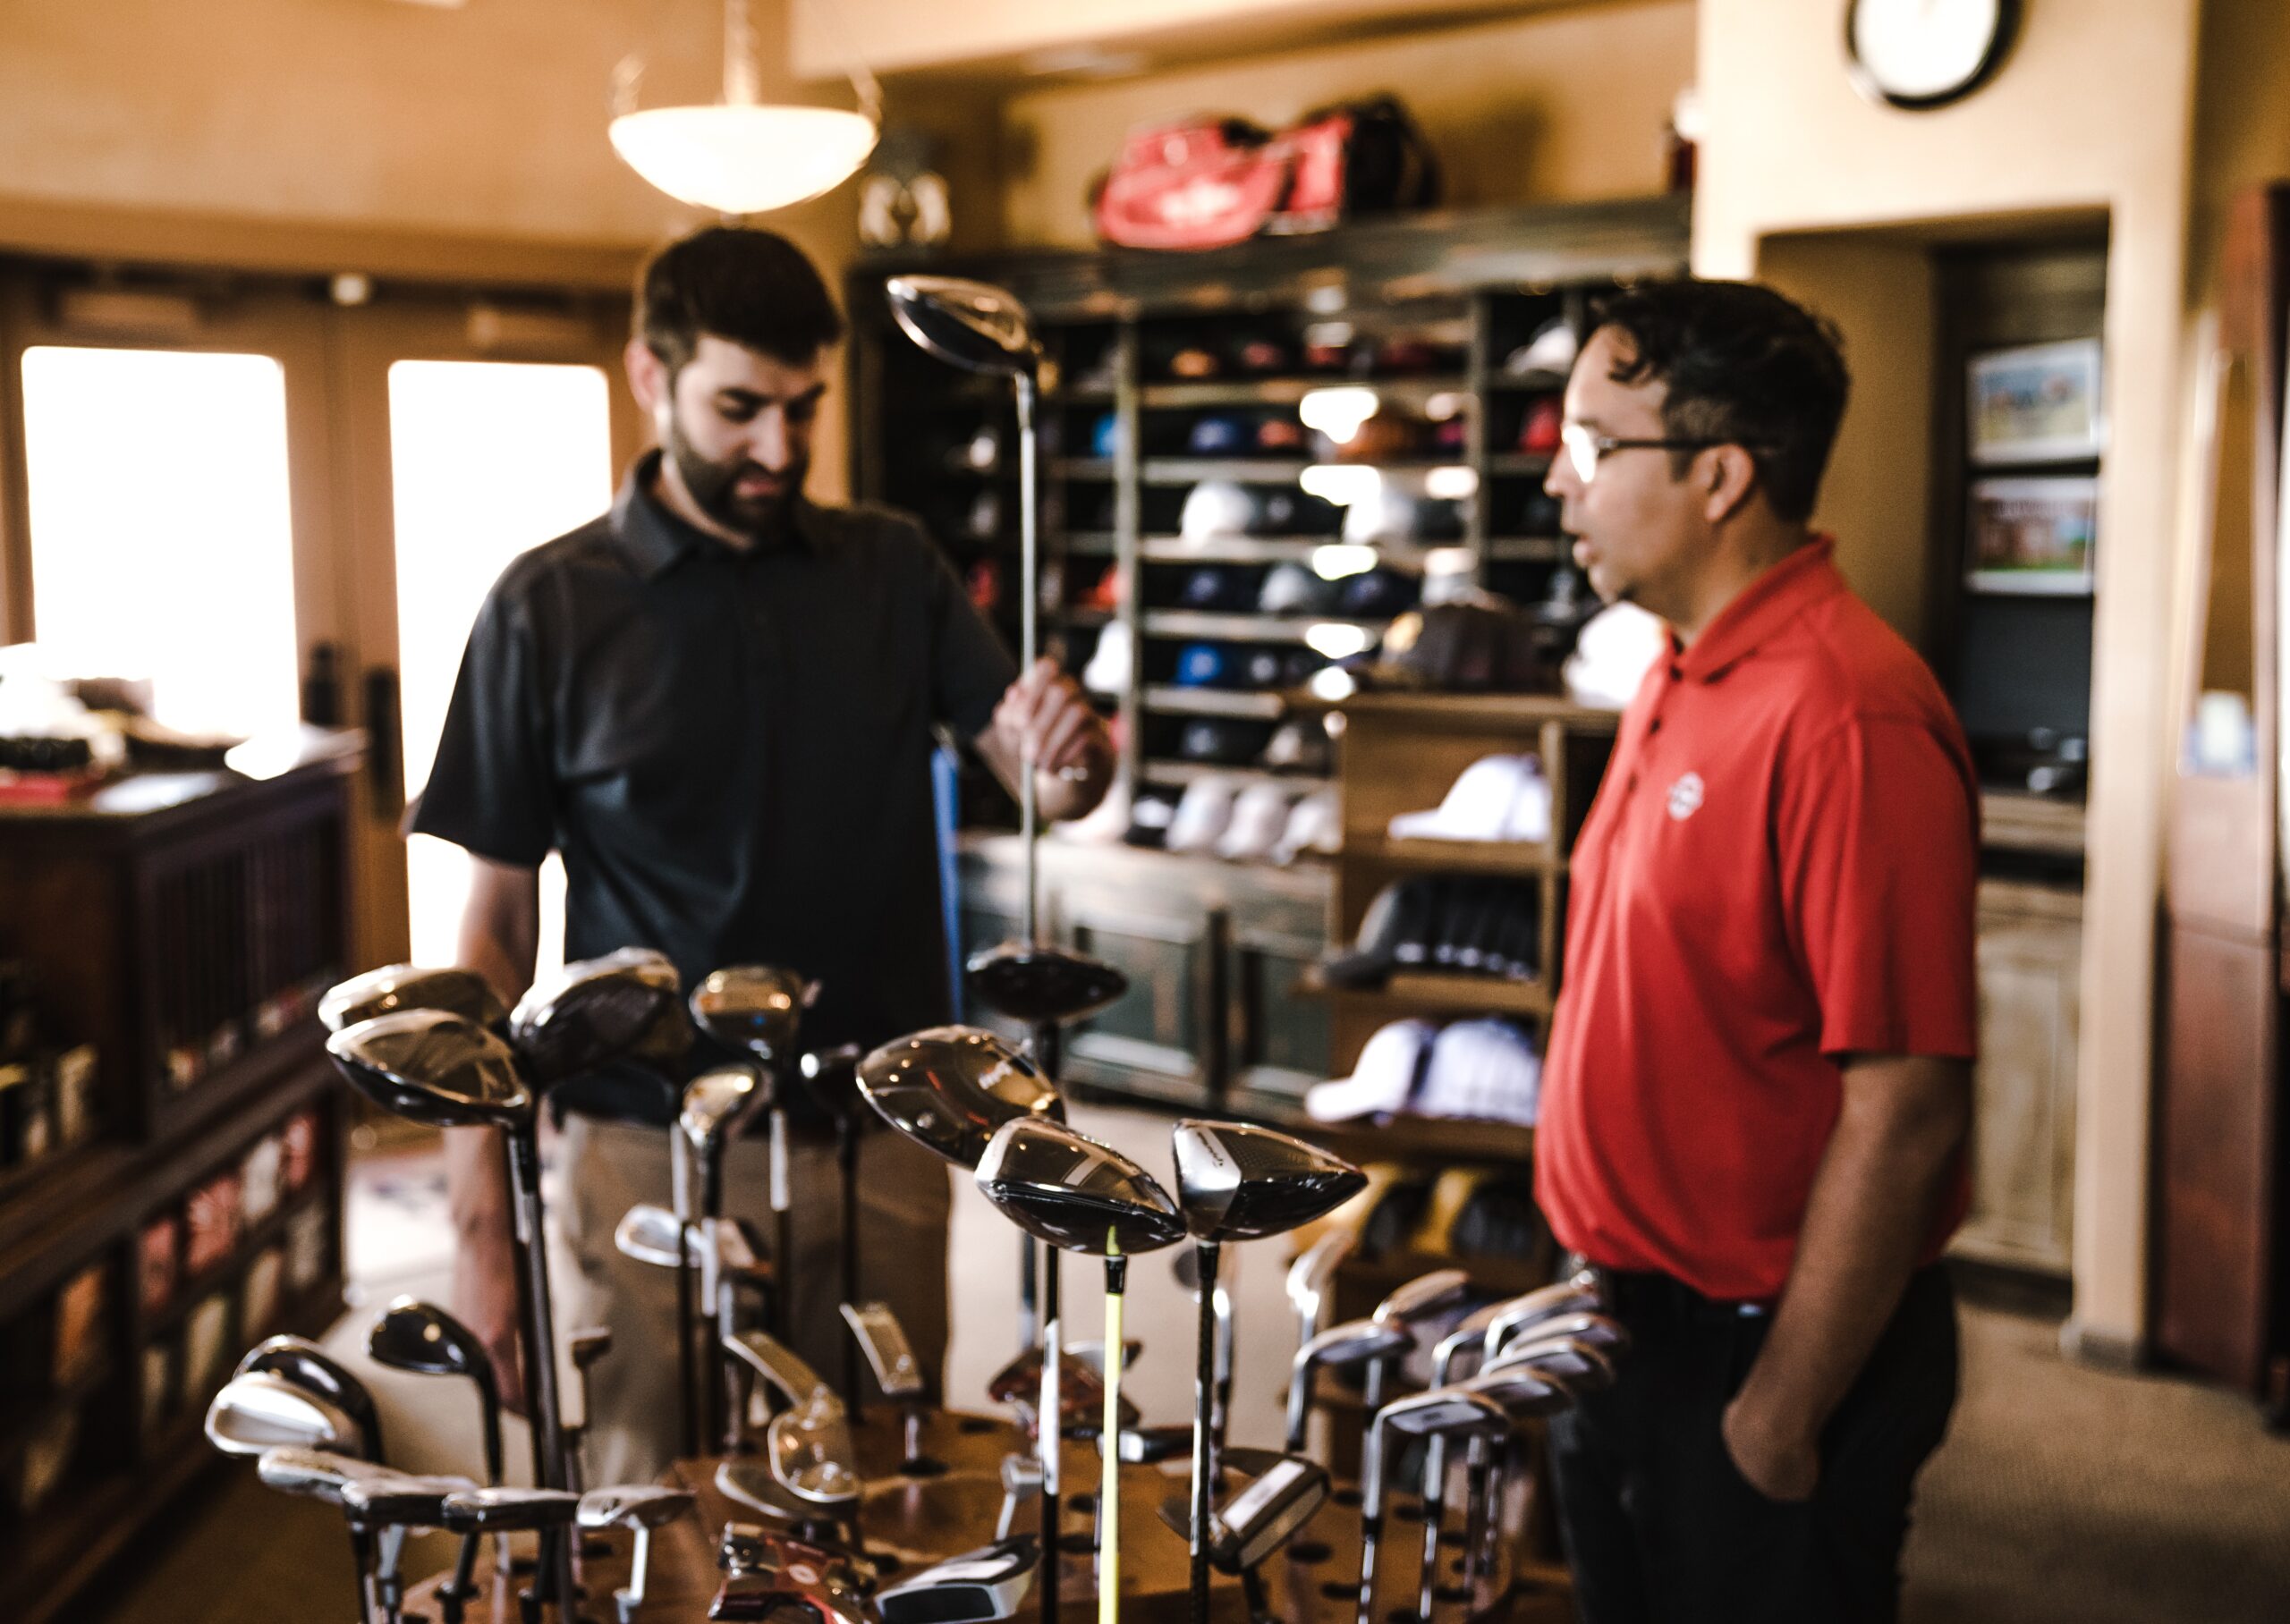 Guy purchasing golf clubs assisted by salesperson